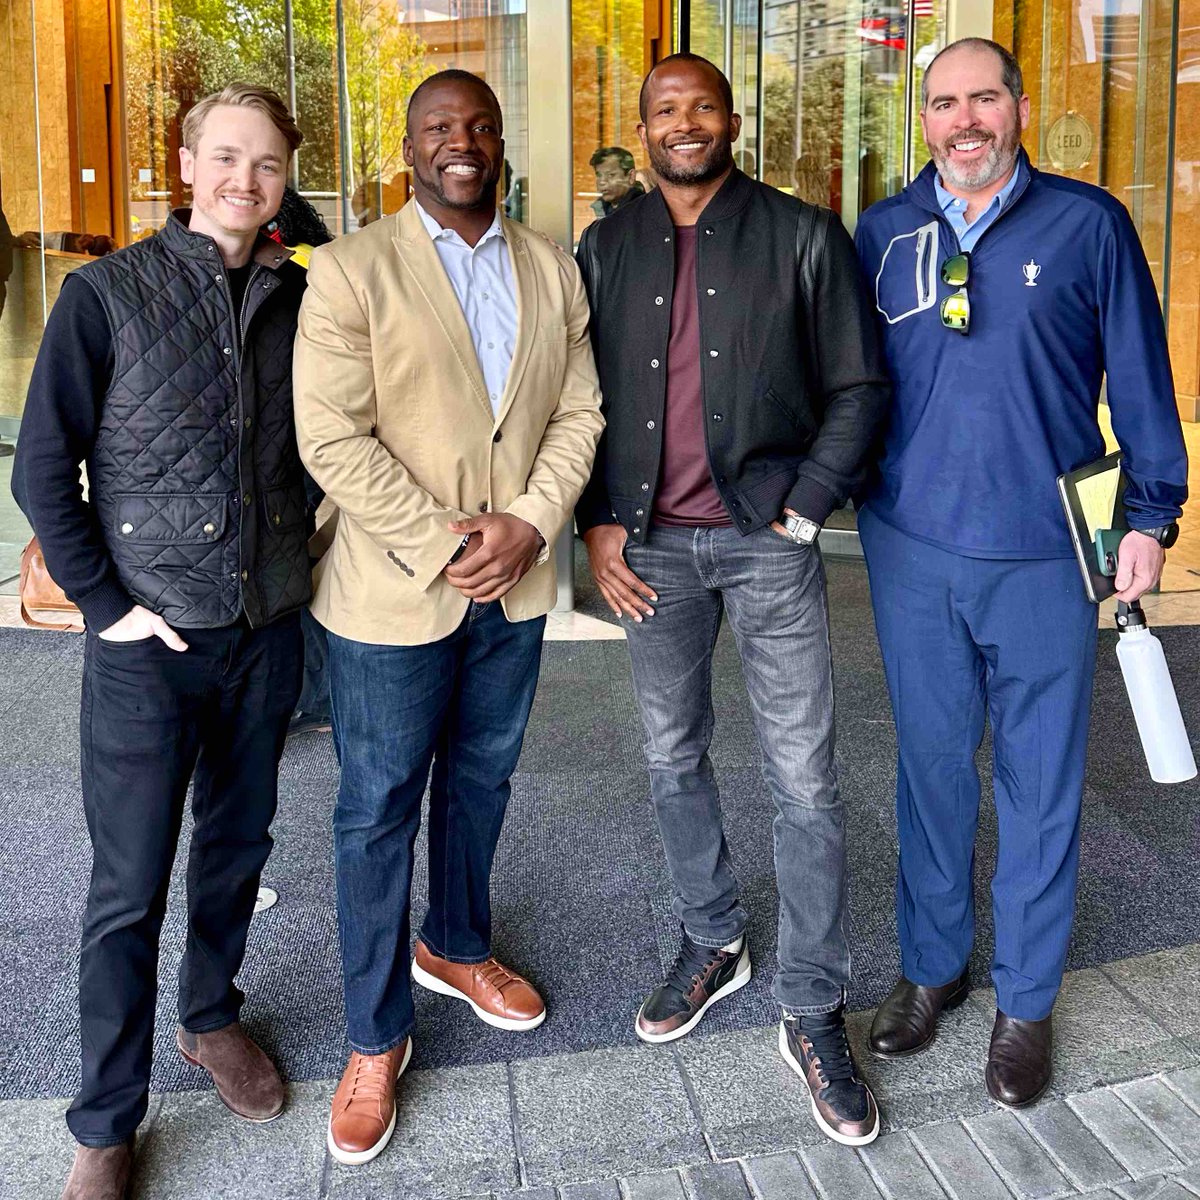 Always great catching up with big bro and fellow DAWG Champ Bailey! We’re both on the mission to make a bigger impact off the field than we did on it. Shoutout to good friends @MarcFordham and @BrandonBearden for joining us as well. Excited for the future! 🙌🏾💪🏾